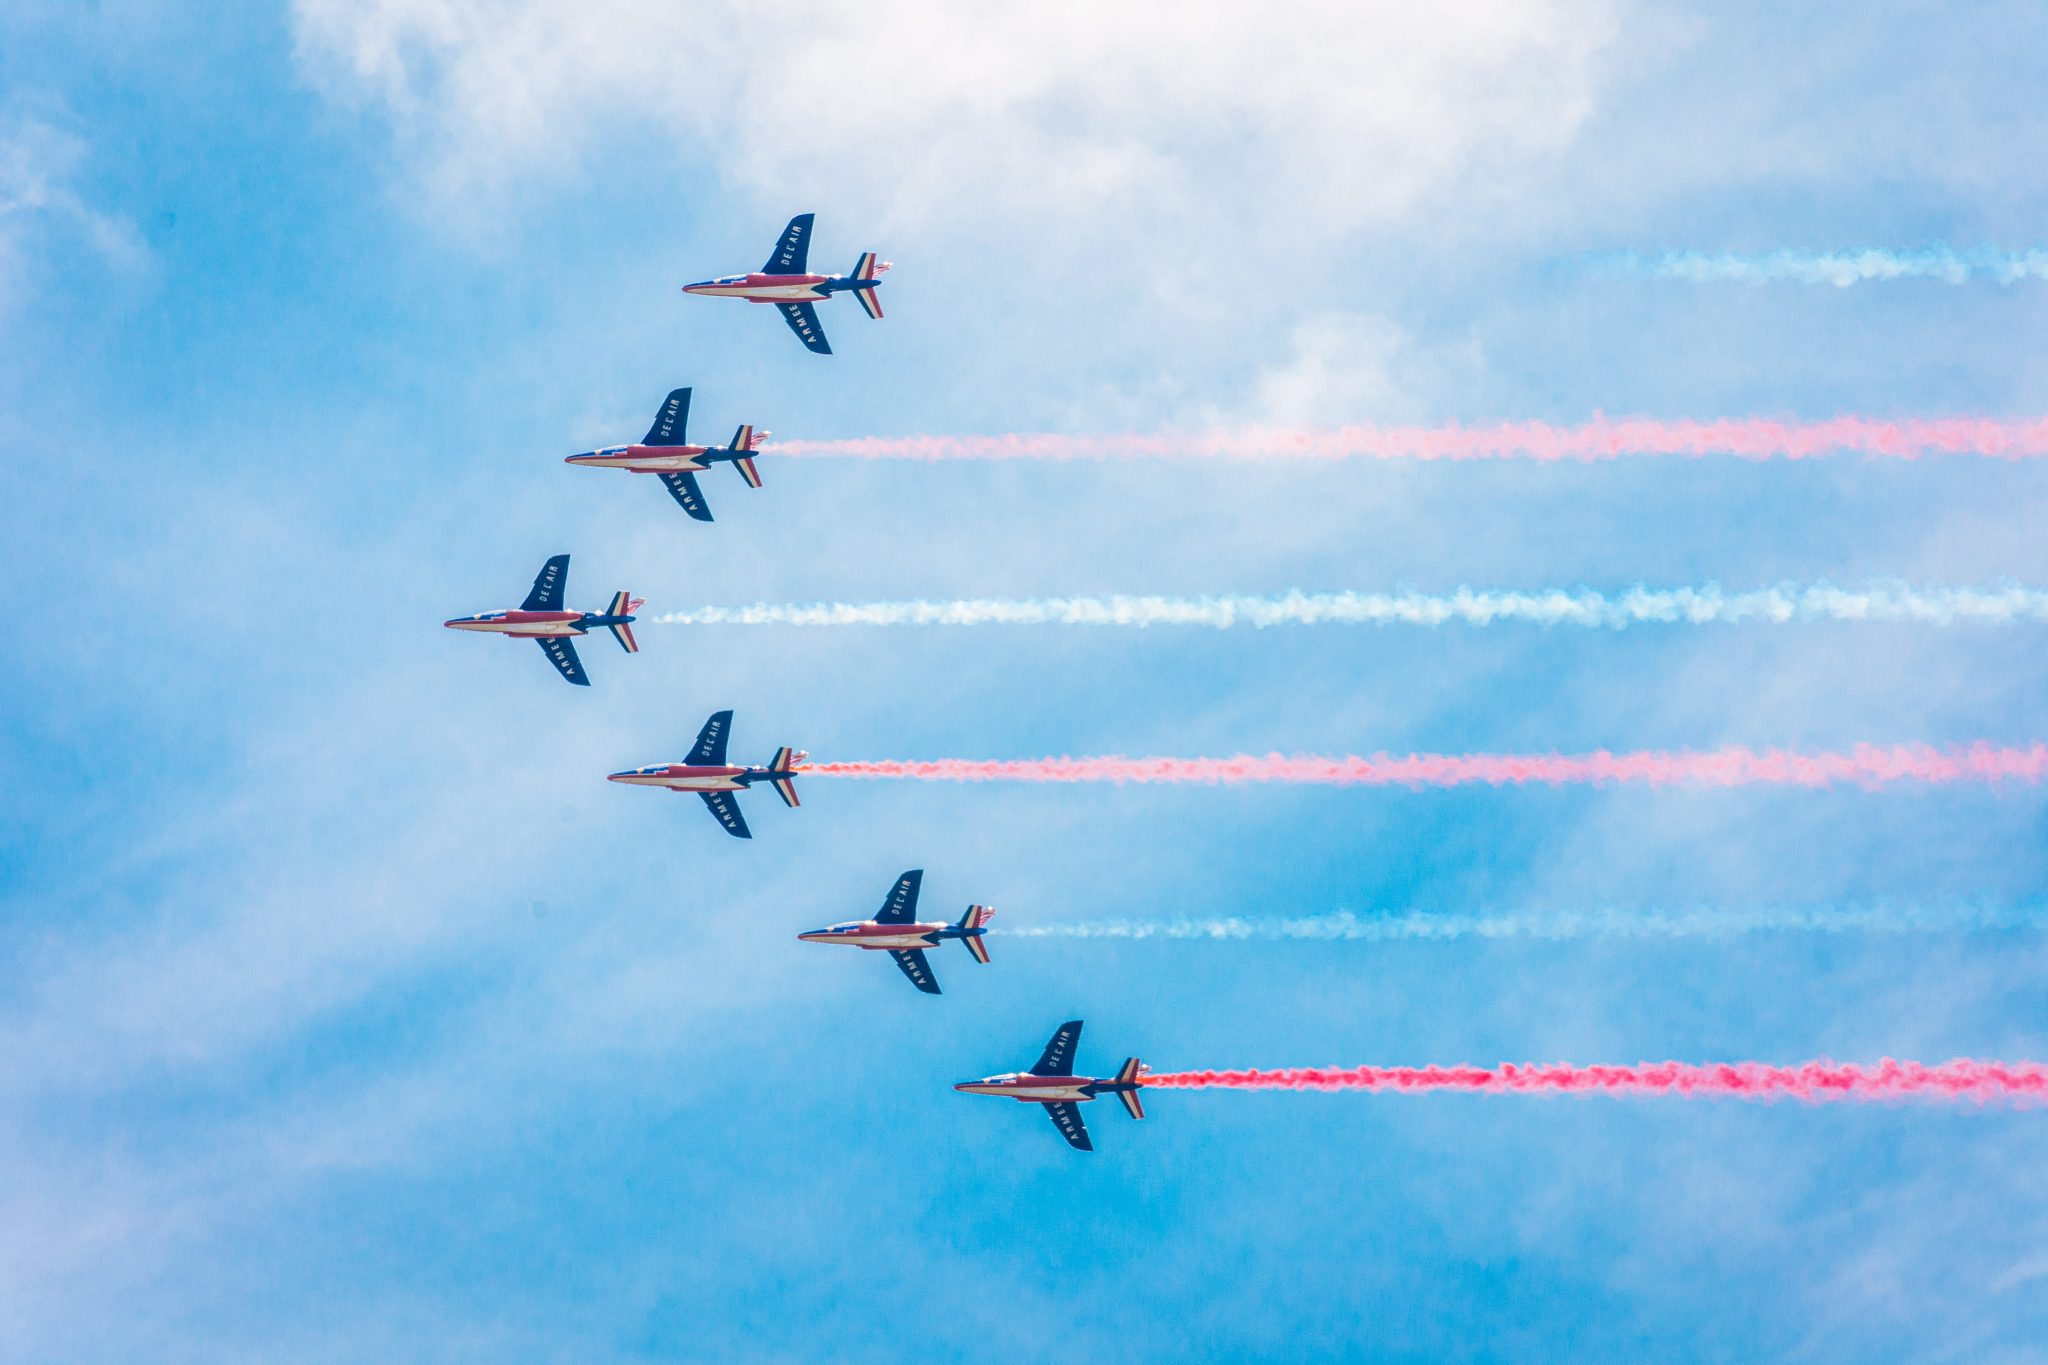 French Armee Del'air planes in formation at an air show